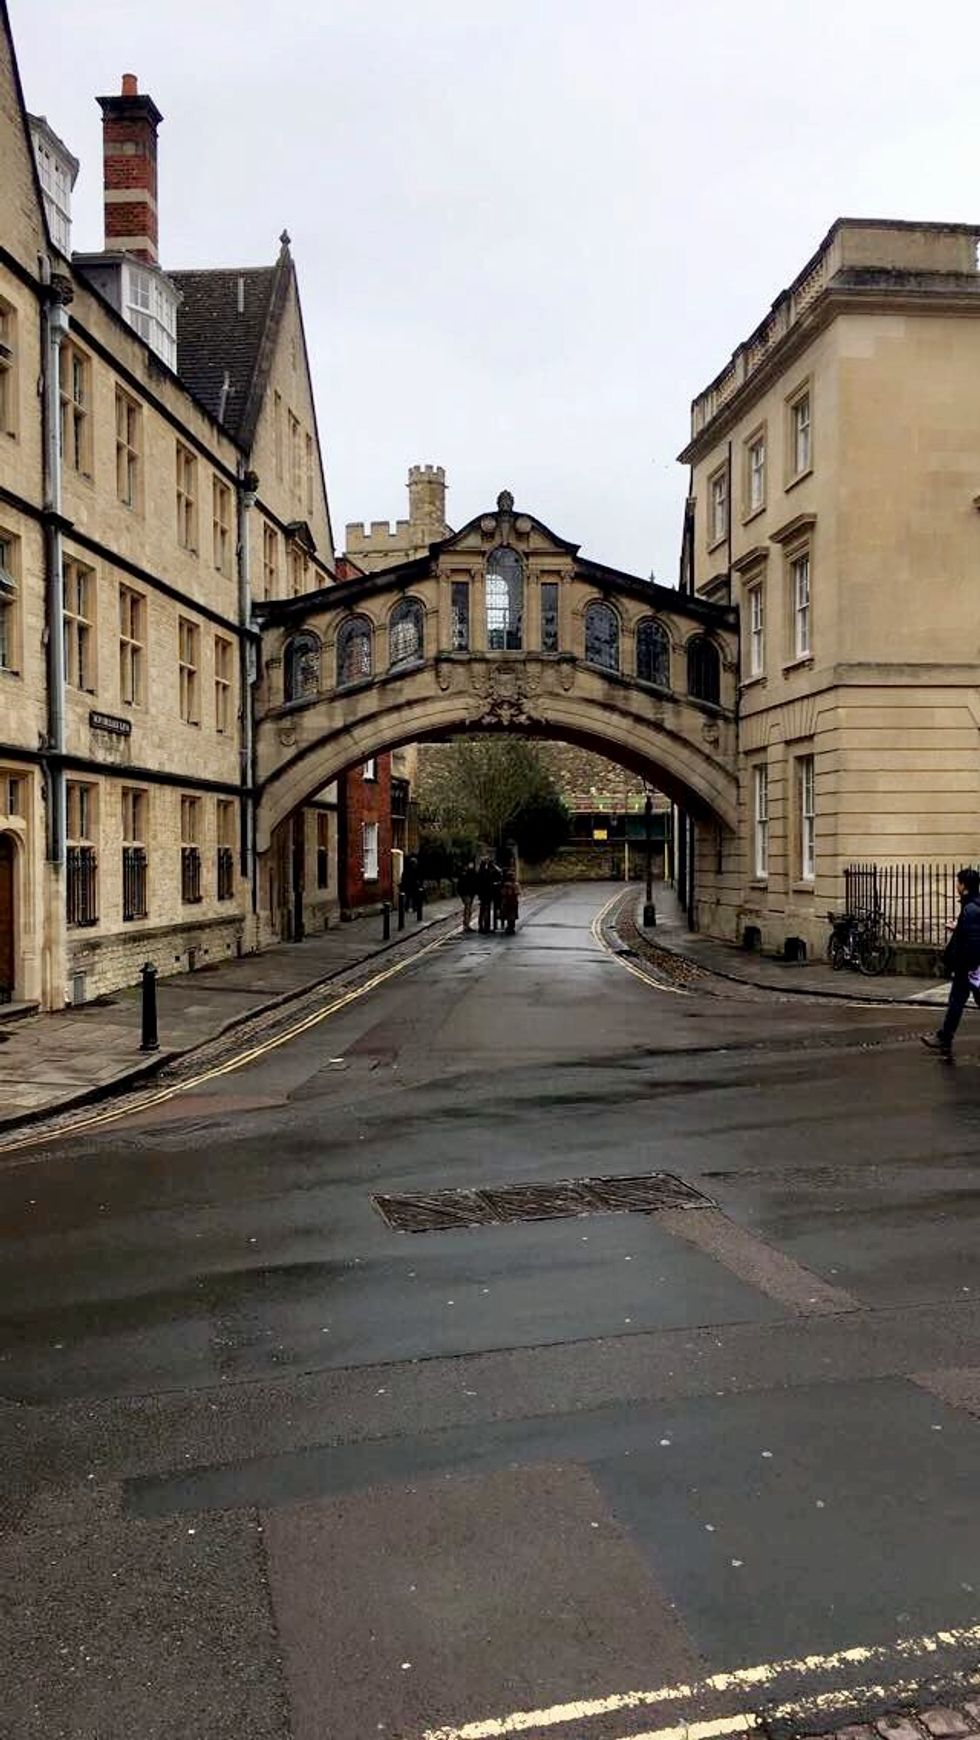 Beginner's Guide To Bath: A Week In Oxford